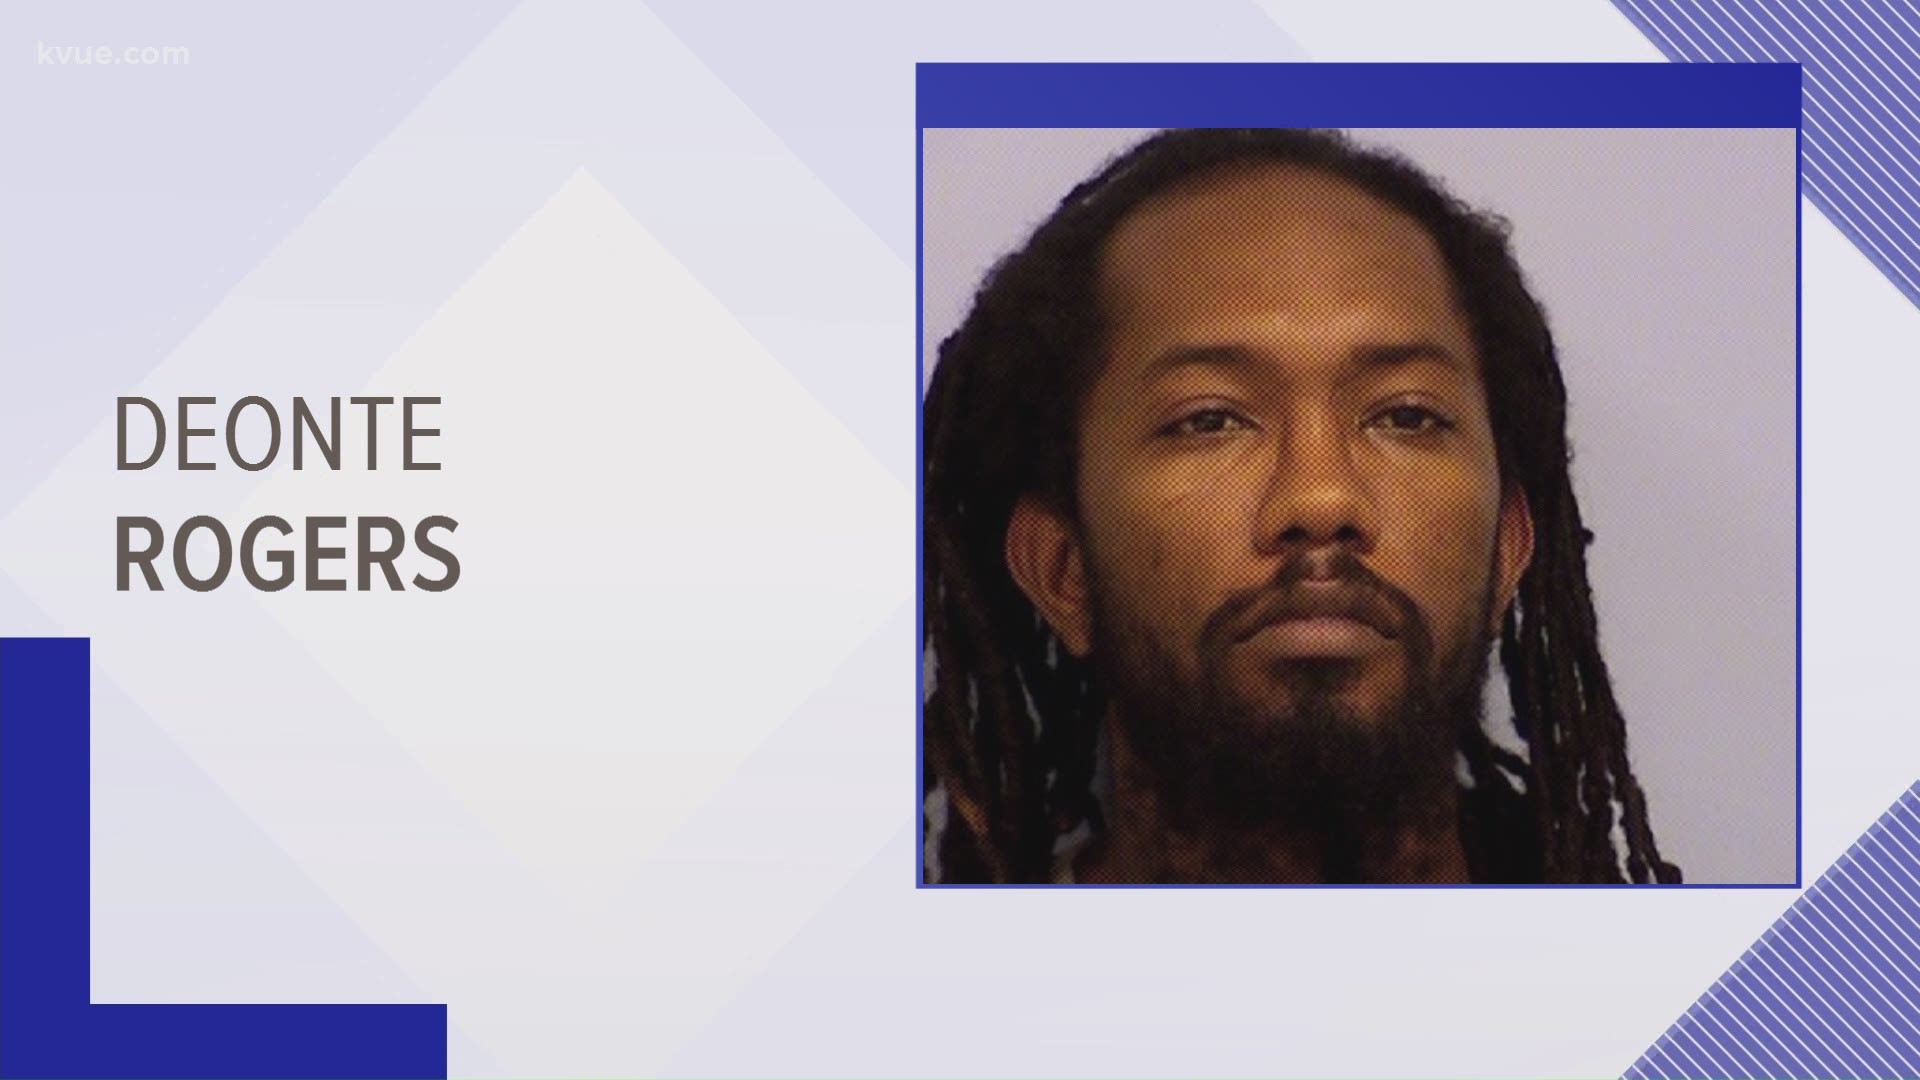 A man accused of shooting at officers in Austin last month is now in jail.